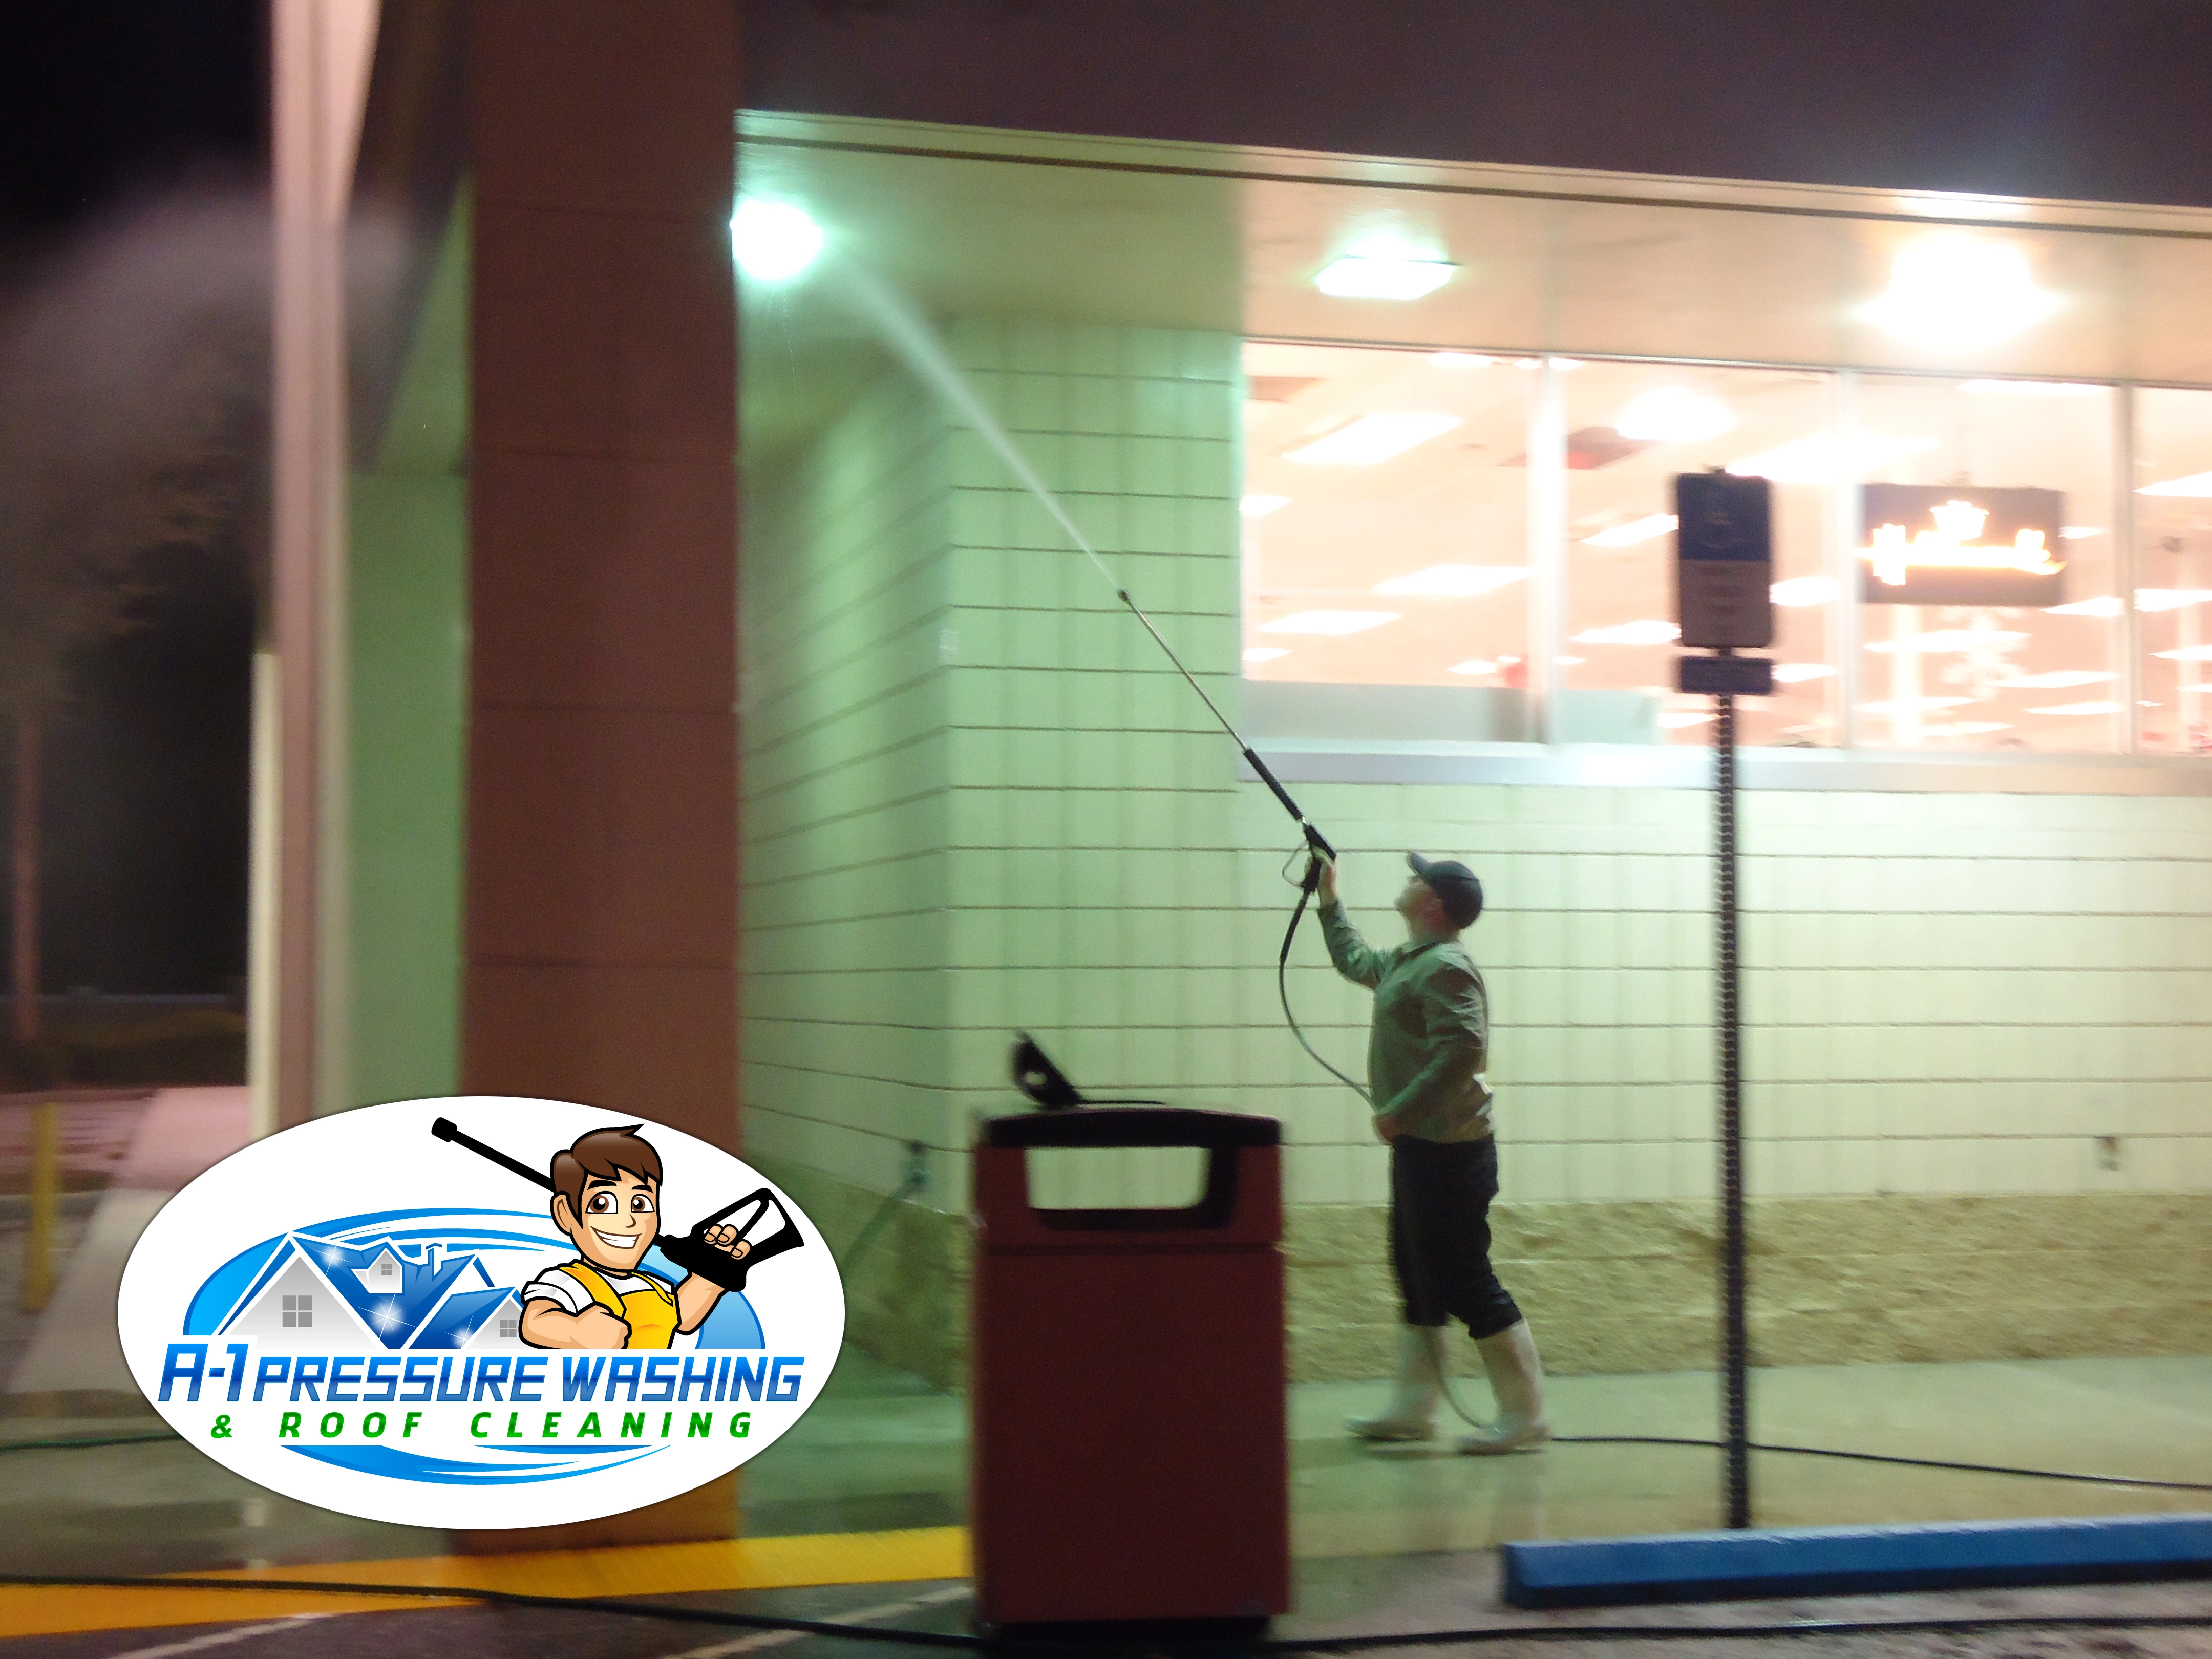 Commercial Pressure Cleaning Services | A-1 Pressure Washing & Roof Cleaning | 941-815-8454 